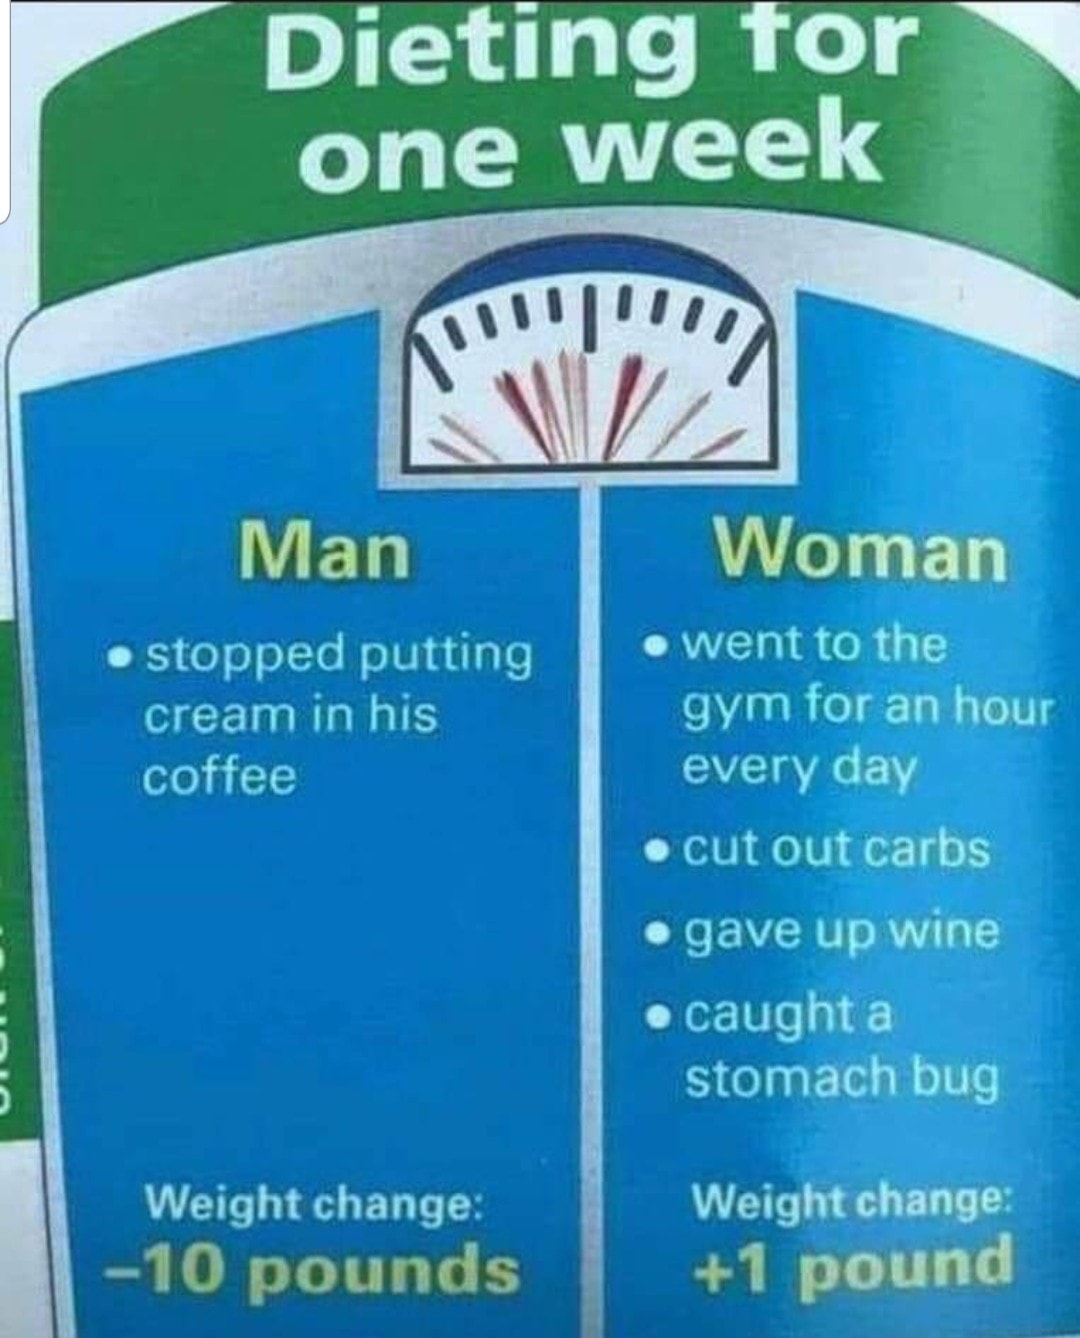 water - Dieting for one week At!!!!!! Man stopped putting cream in his coffee Woman went to the gym for an hour every day cut out carbs gave up wine caught a stomach bug Weight change 10 pounds Weight change 1 pound